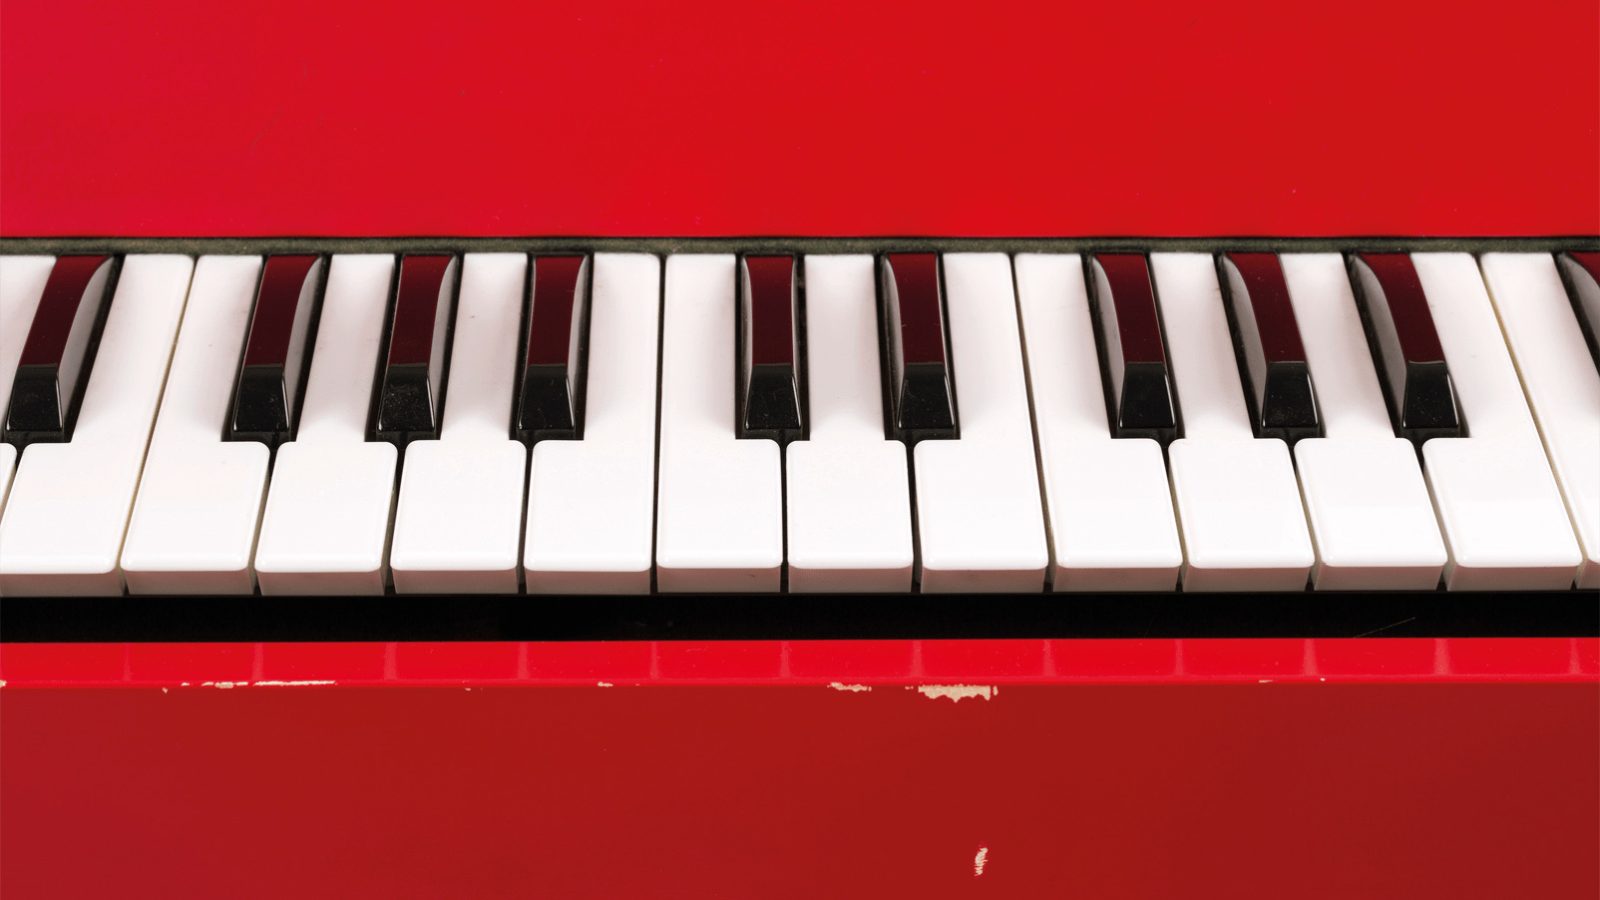 Close-up of a red, worn electric organ with black and white keyboard.